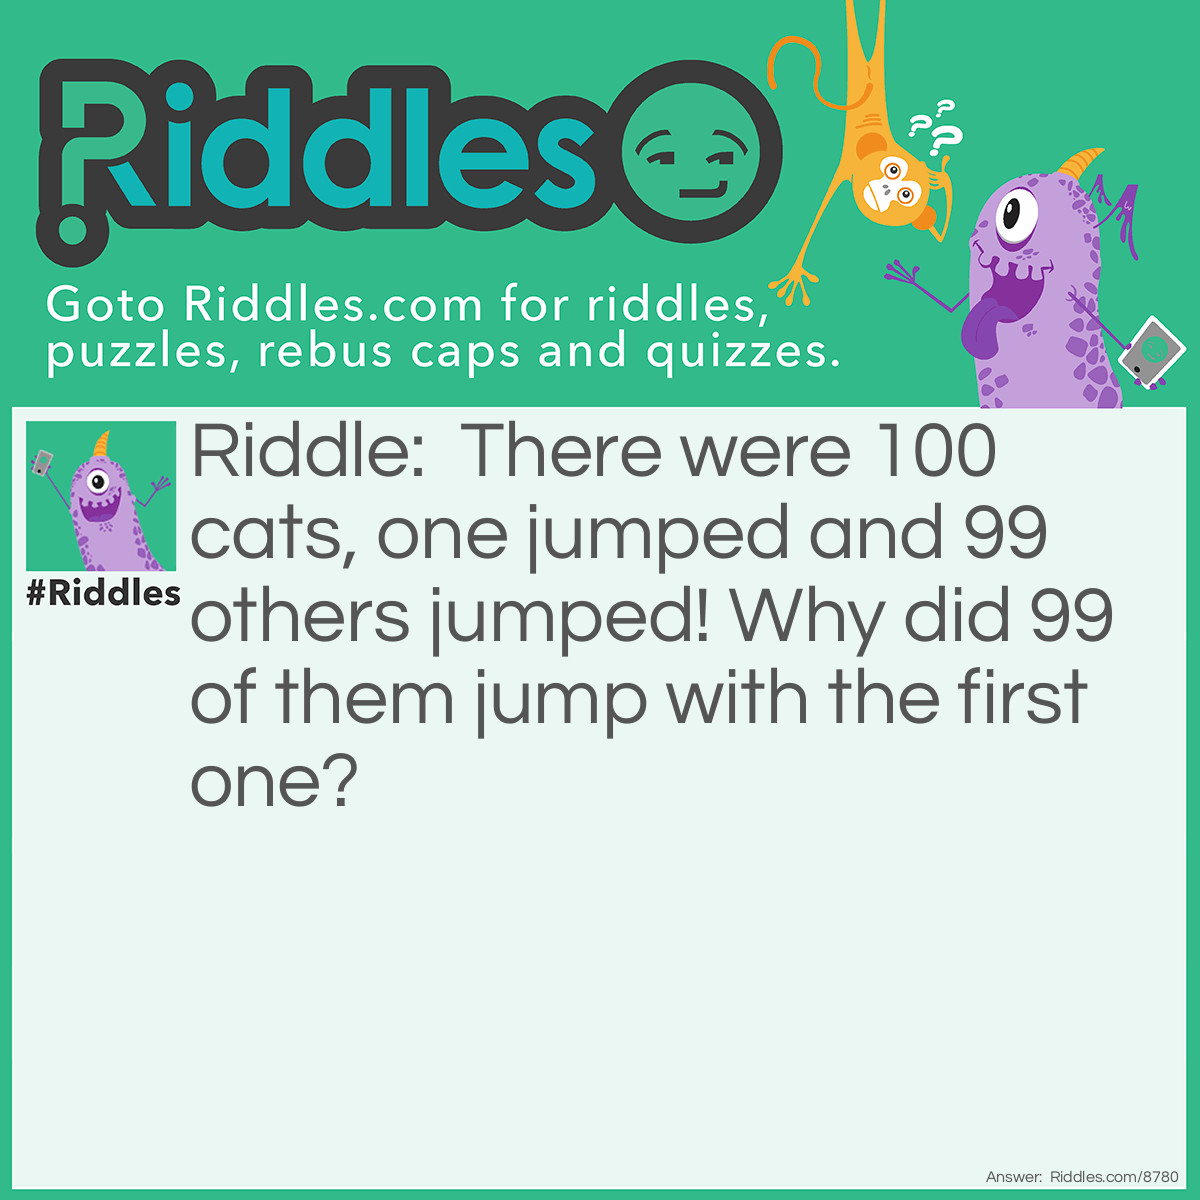 Riddle: There were 100 cats, one jumped and 99 others jumped! Why did 99 of them jump with the first one? Answer: Because they were copy-cats!